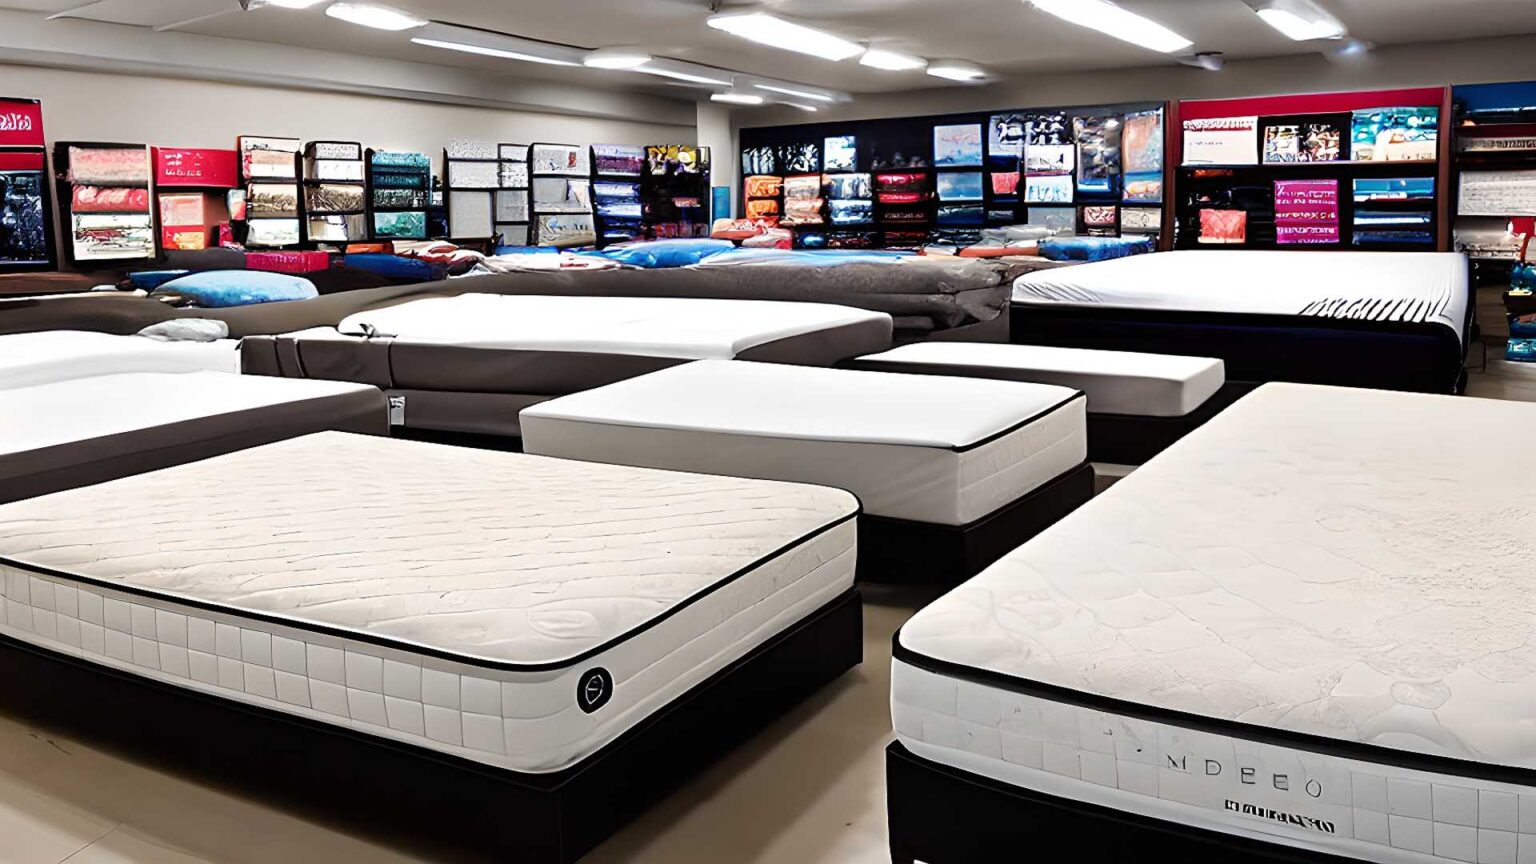 Mattress Stores, mattress dealers, and mattress retailers near me in Placentia, CA